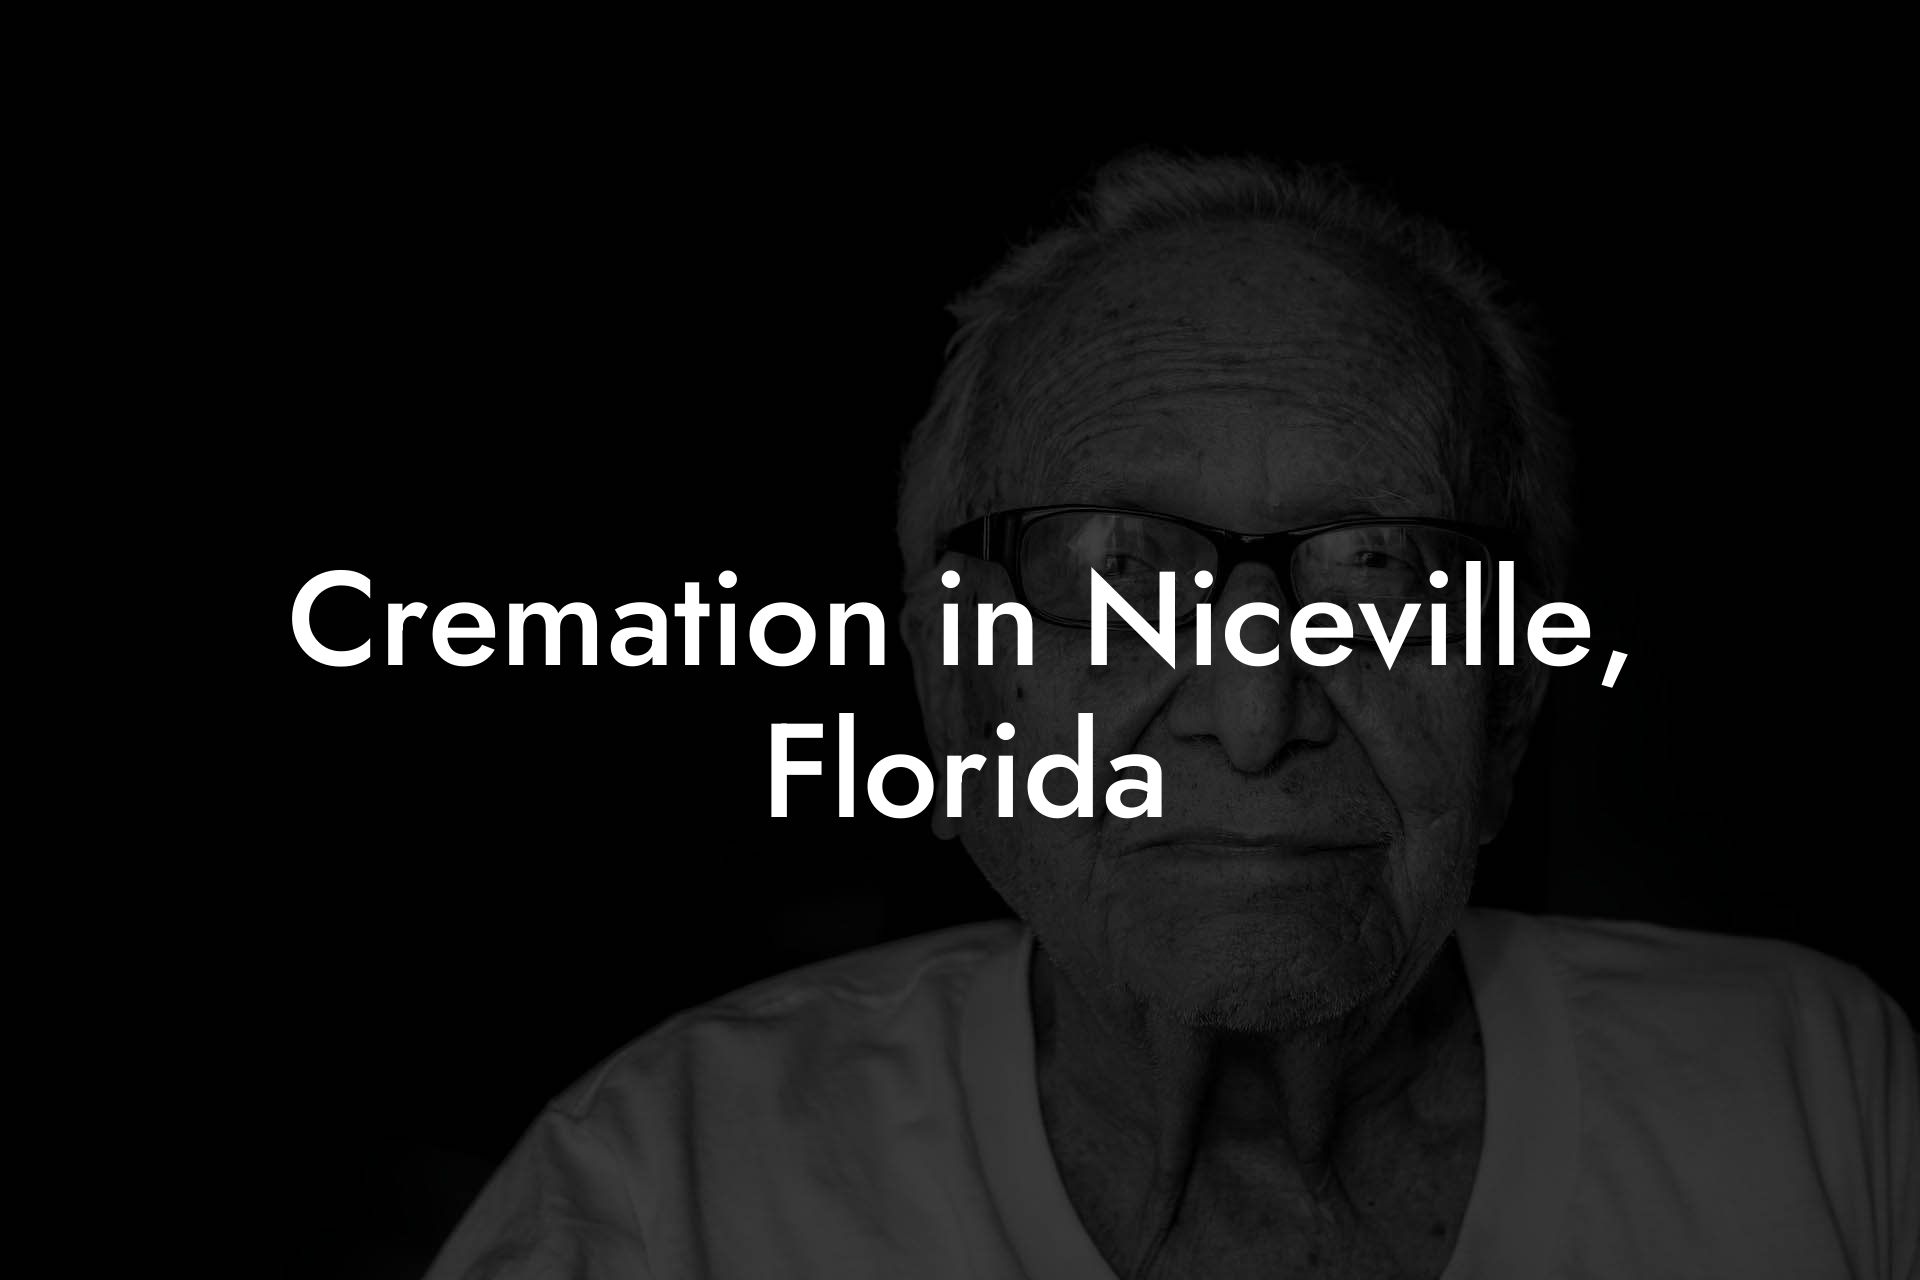 Cremation in Niceville, Florida